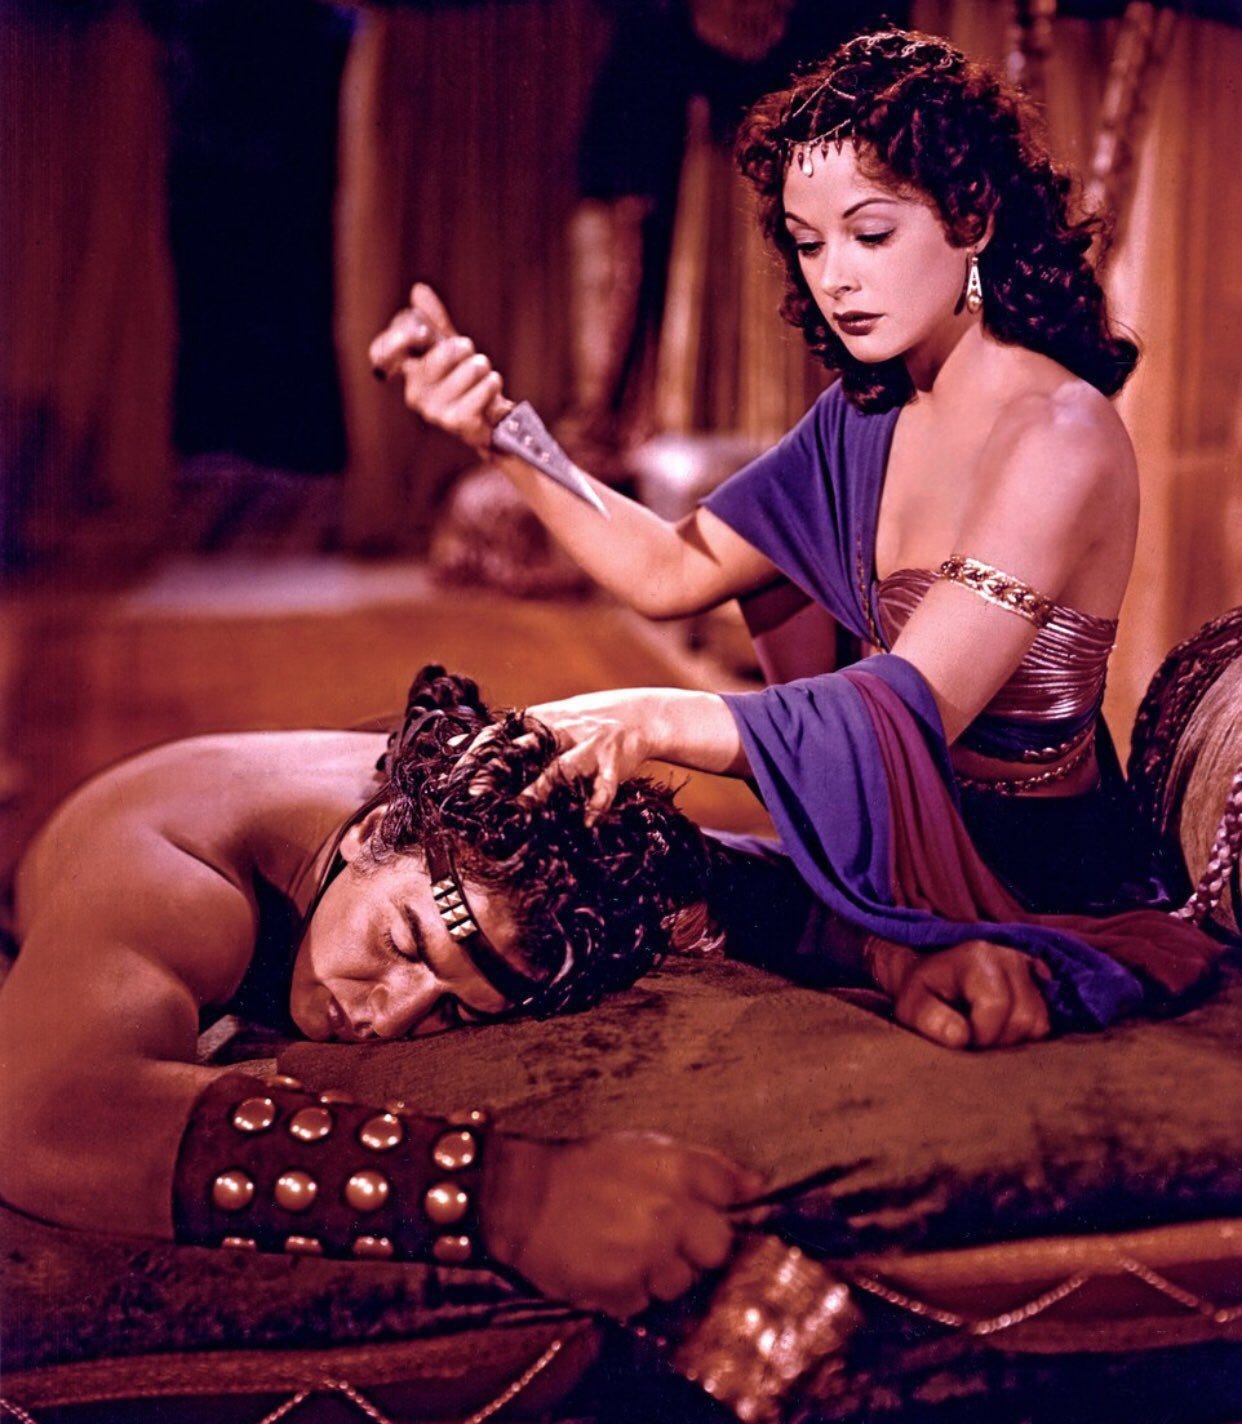 Hollywood Remembered on X: "Victor Mature and Hedy Lamarr starred in Cecil  B. DeMille's, Samson and Delilah (1949) https://t.co/W4cBSVK46K" / X